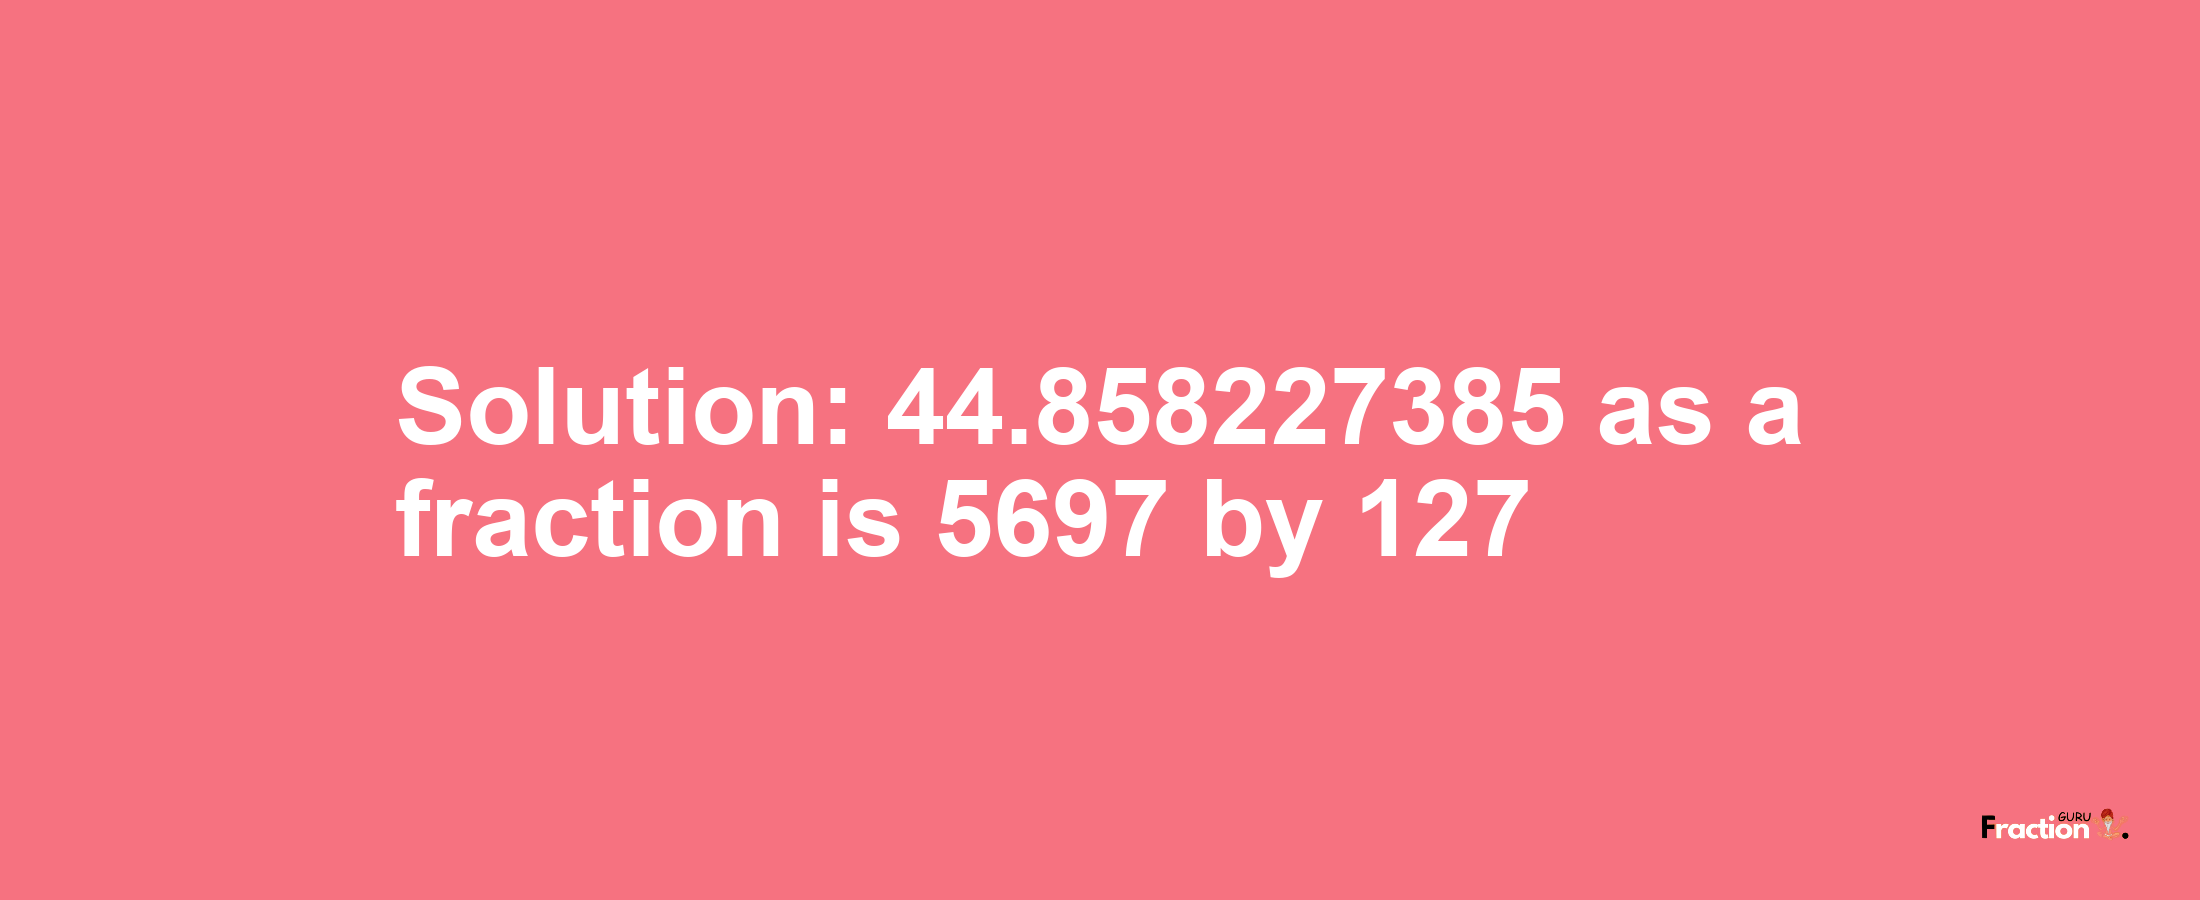 Solution:44.858227385 as a fraction is 5697/127